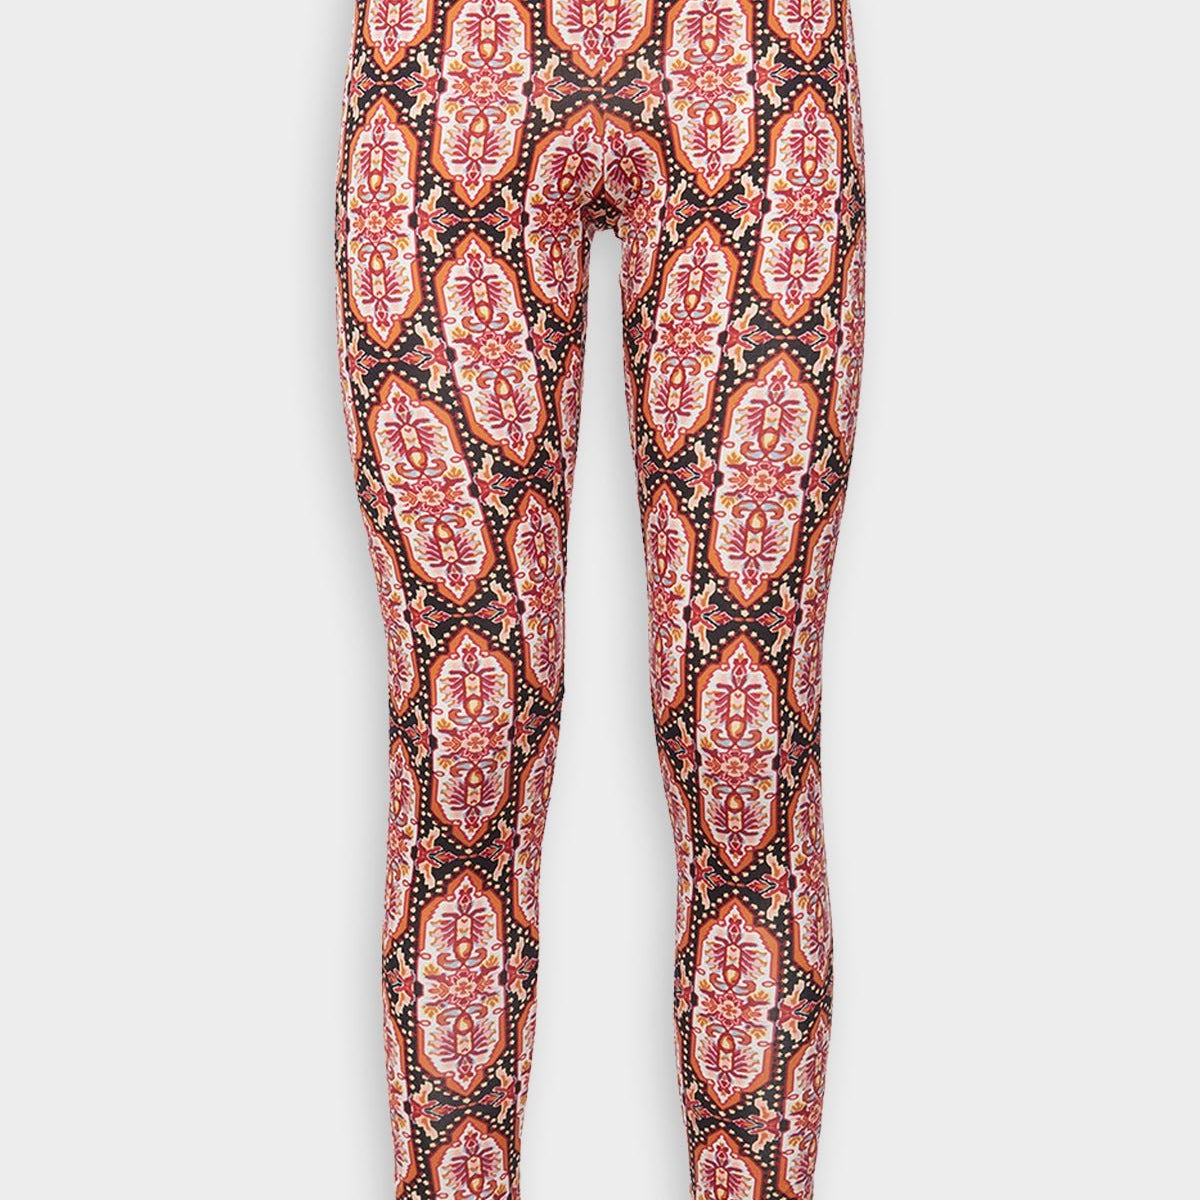 Paisley Chic Patterned Tights for Women -  Canada